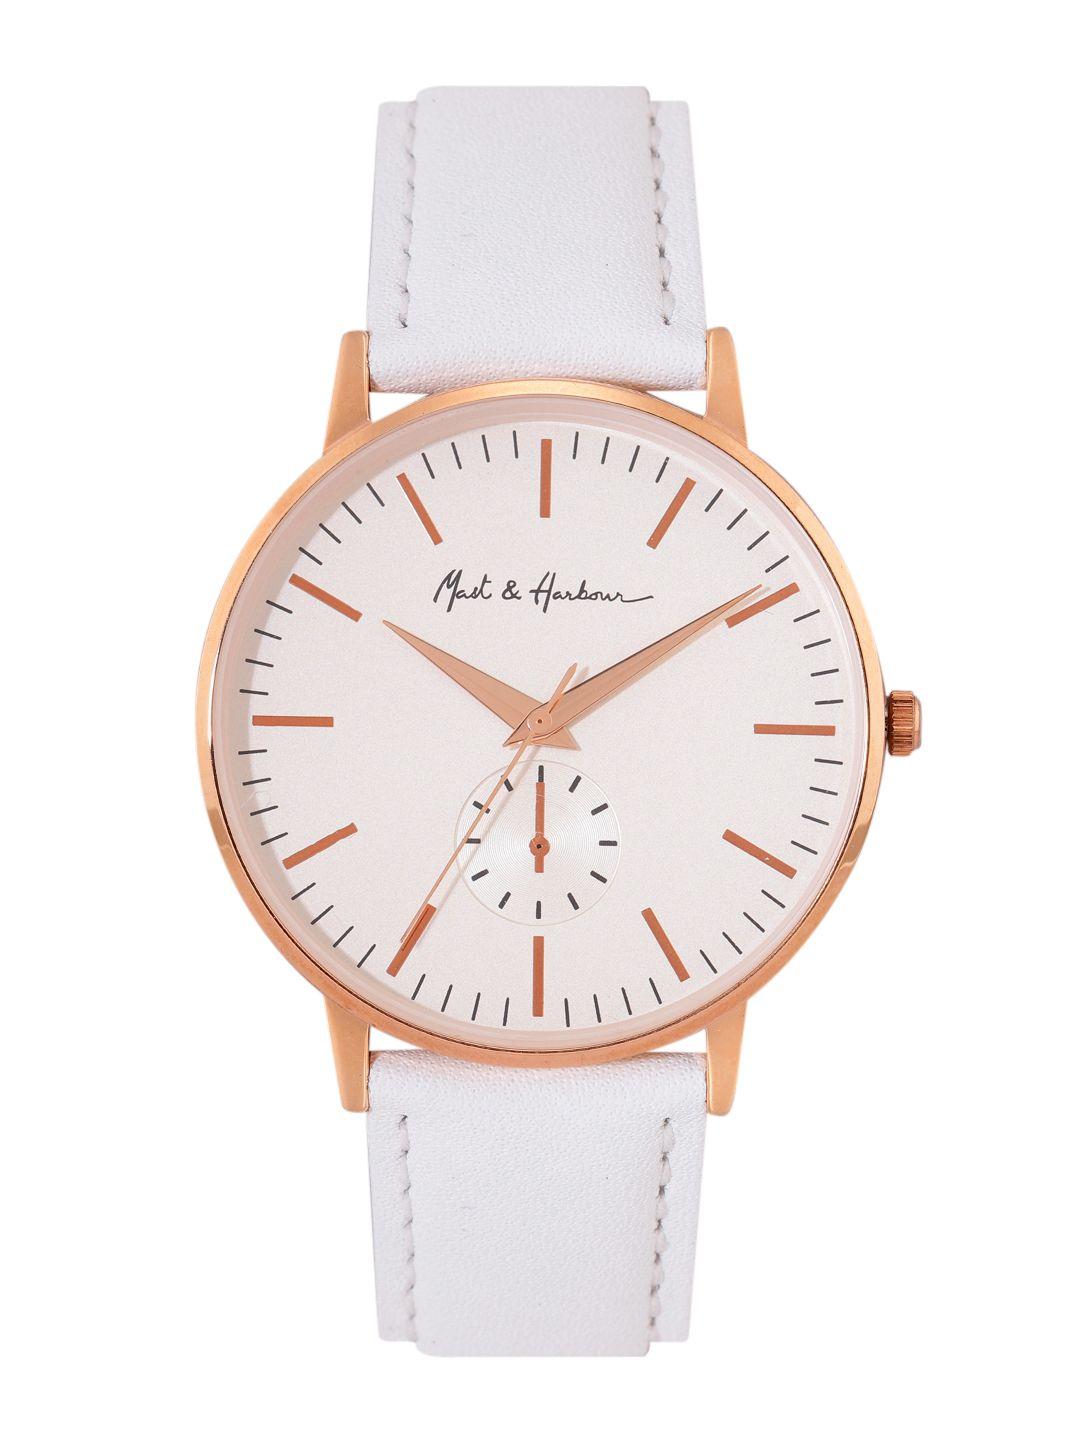 Mast & Harbour Women Analogue Watch MH-01-01A-Rose Gold